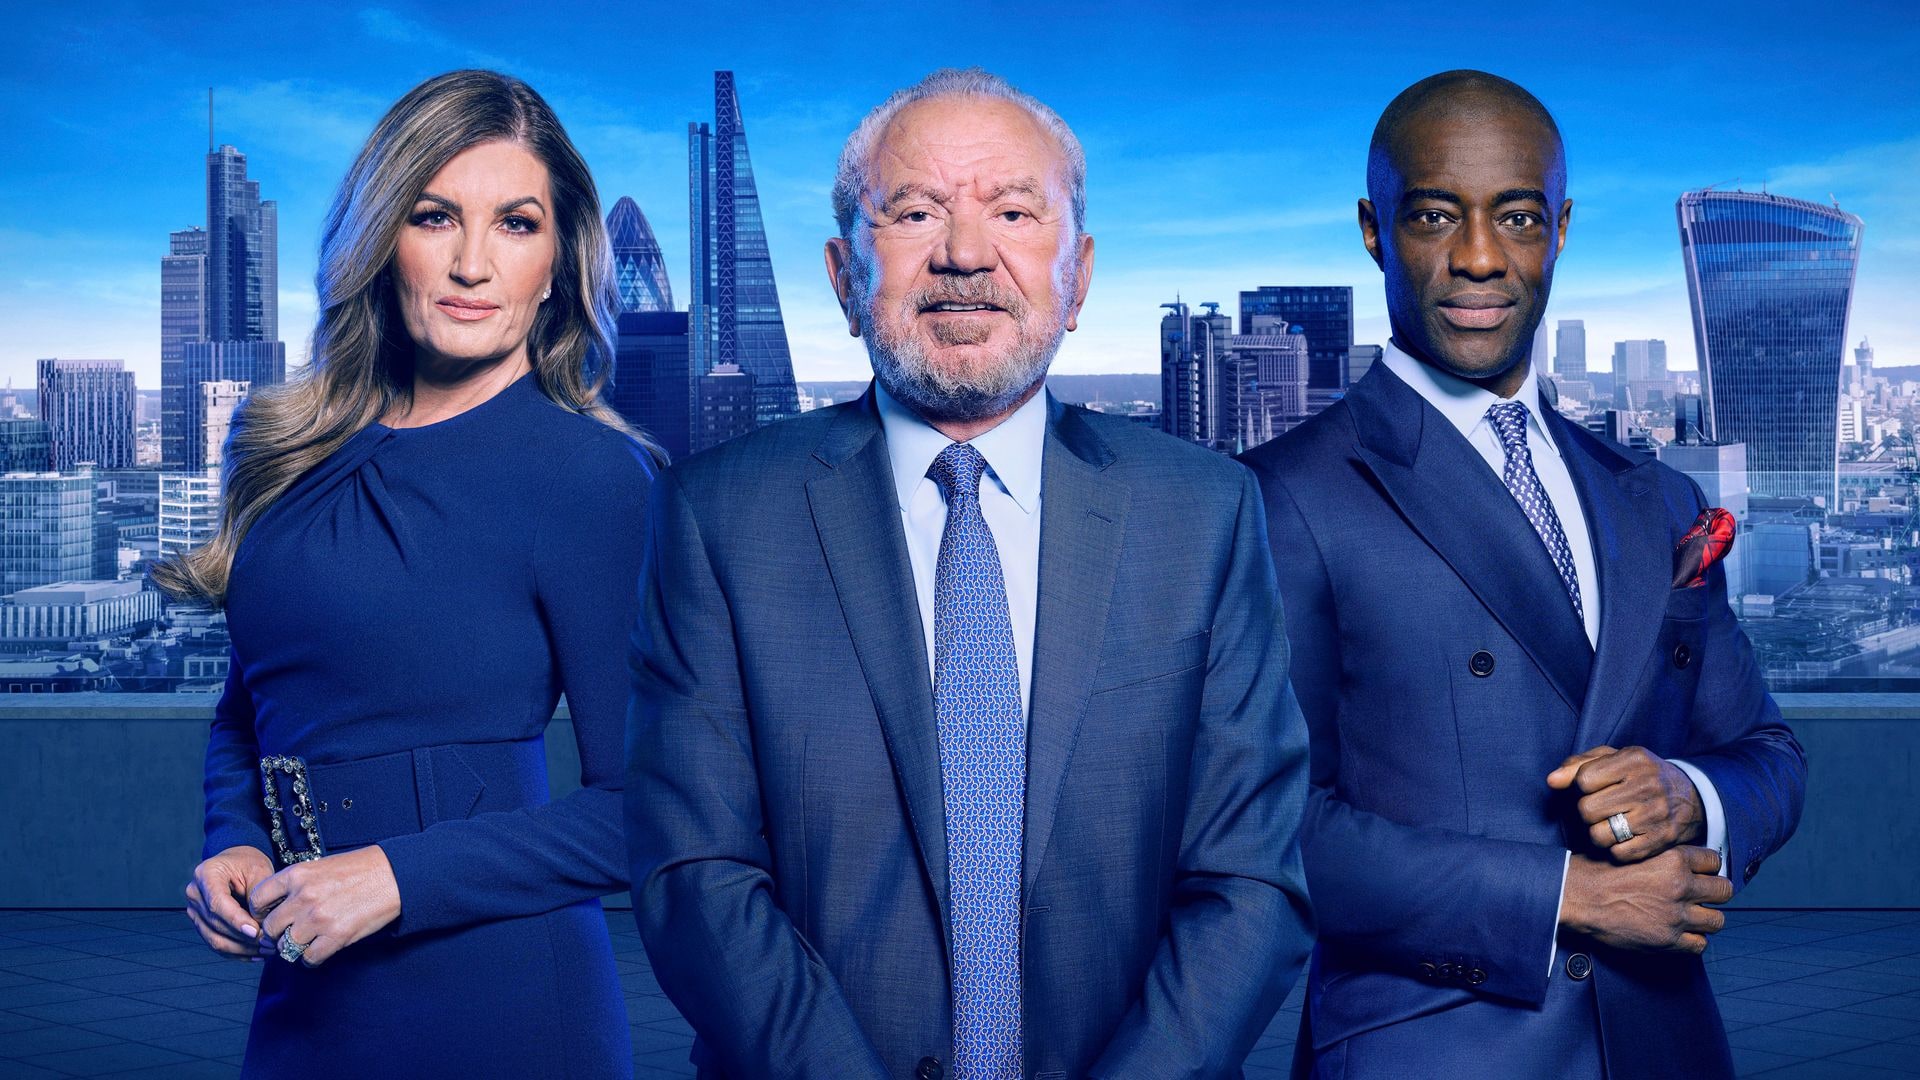 The Apprentice with Karren Brady, Lord Alan Sugar, and Tim Campbell